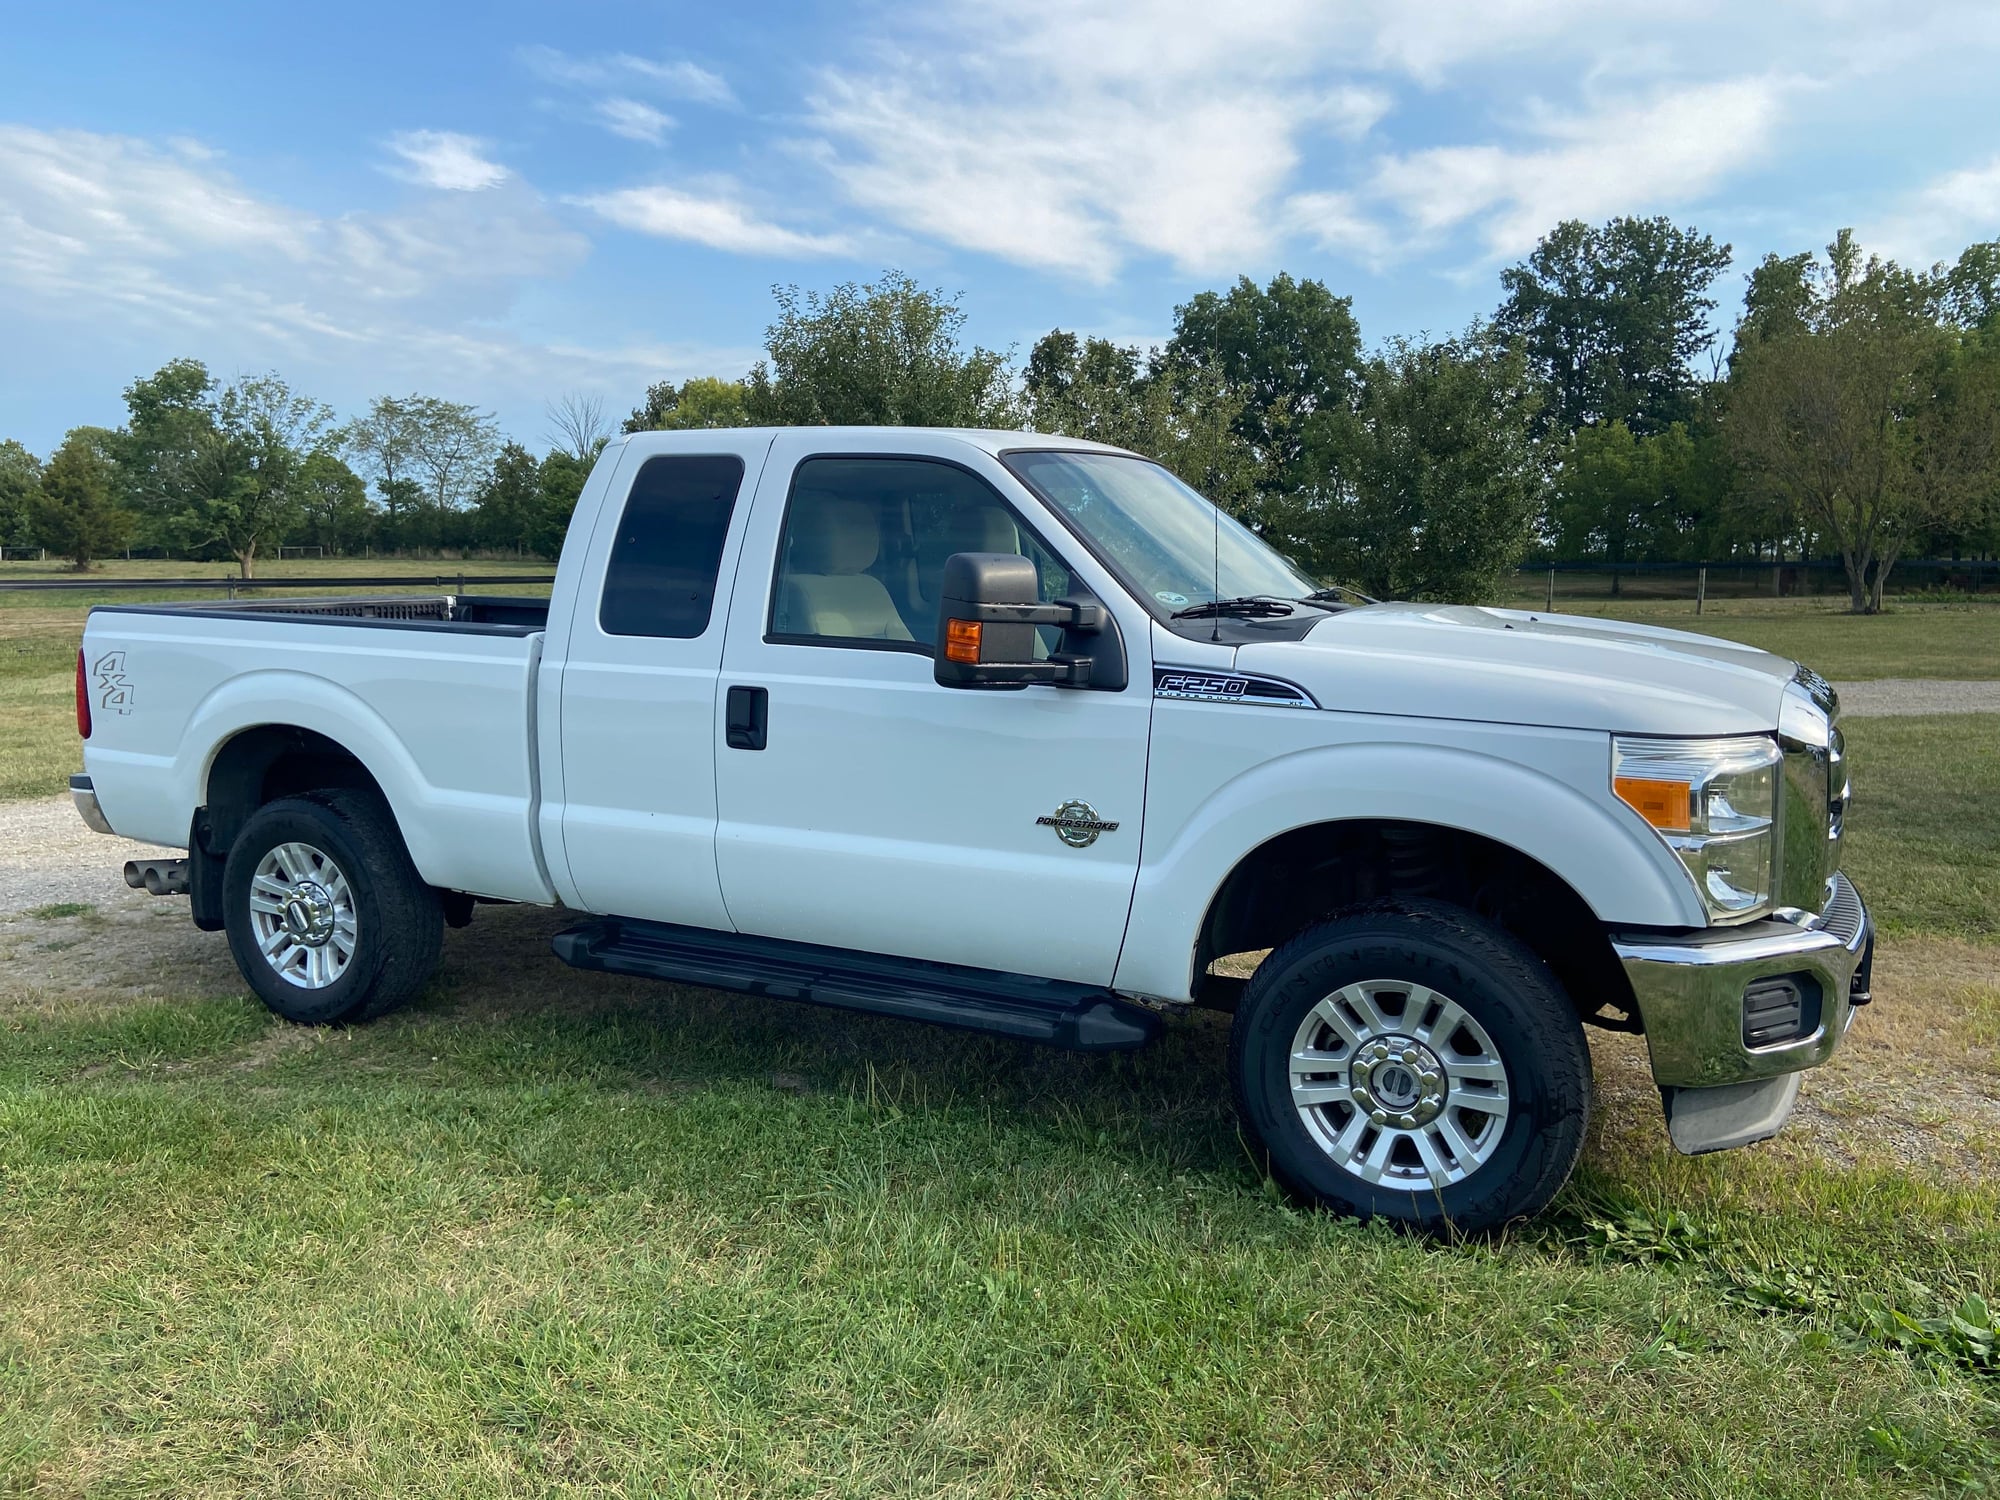 2012 Ford F-250 Super Duty - '12 F250 SuperDuty Diesel - Used - VIN 1FT7X2BT3CEB07614 - 60,789 Miles - 8 cyl - 4WD - Automatic - Truck - White - Hamilton, OH 45013, United States